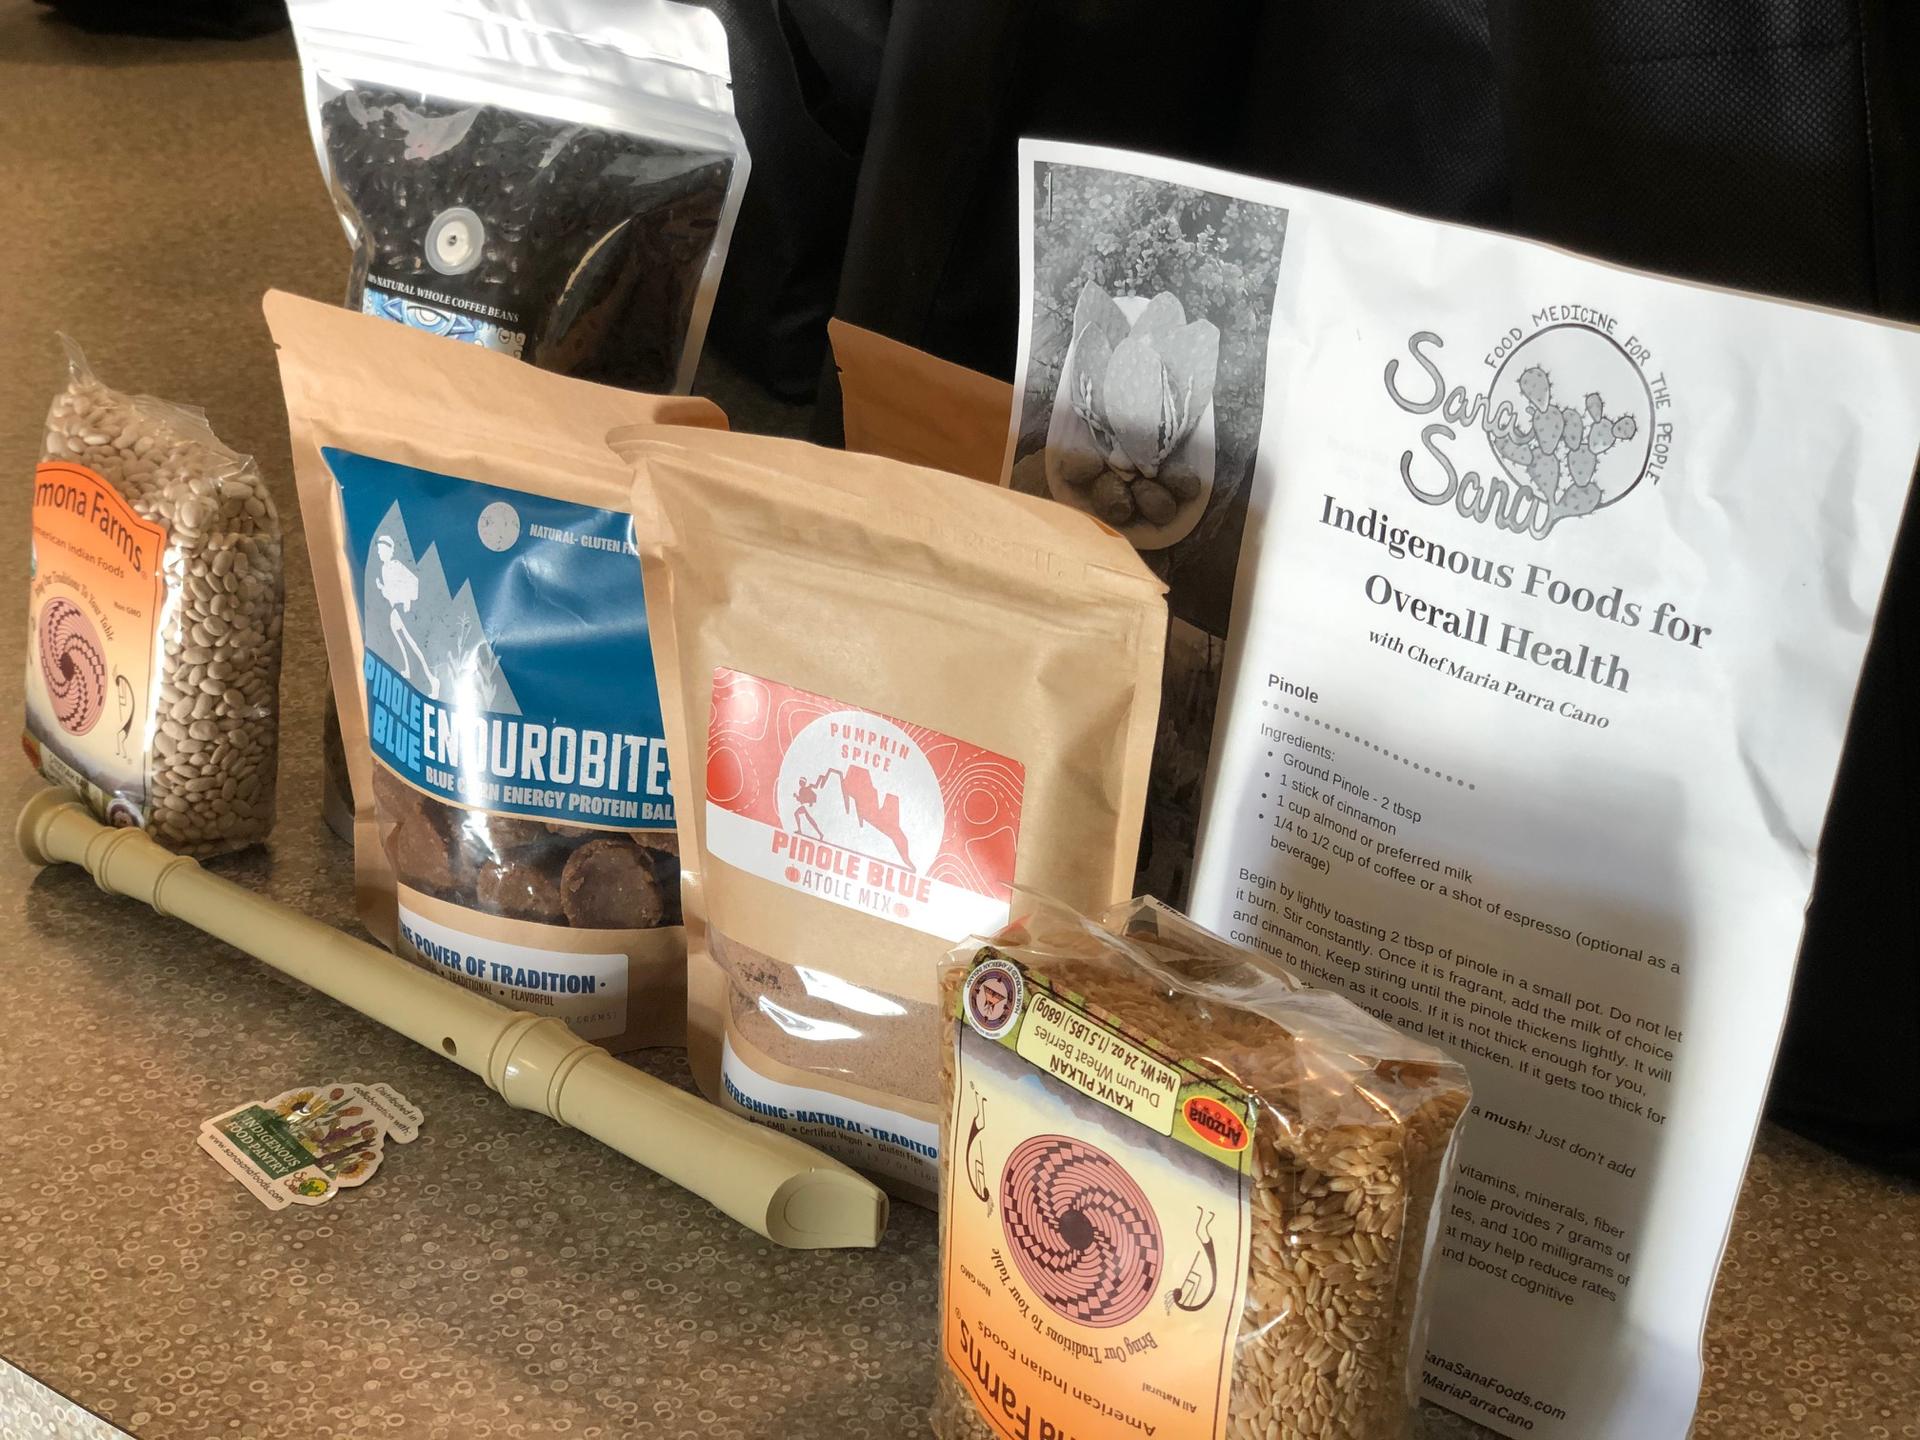 The food care packages distributed by the Cihuapactli Collective contain Indigenous products that are organic and fair trade.